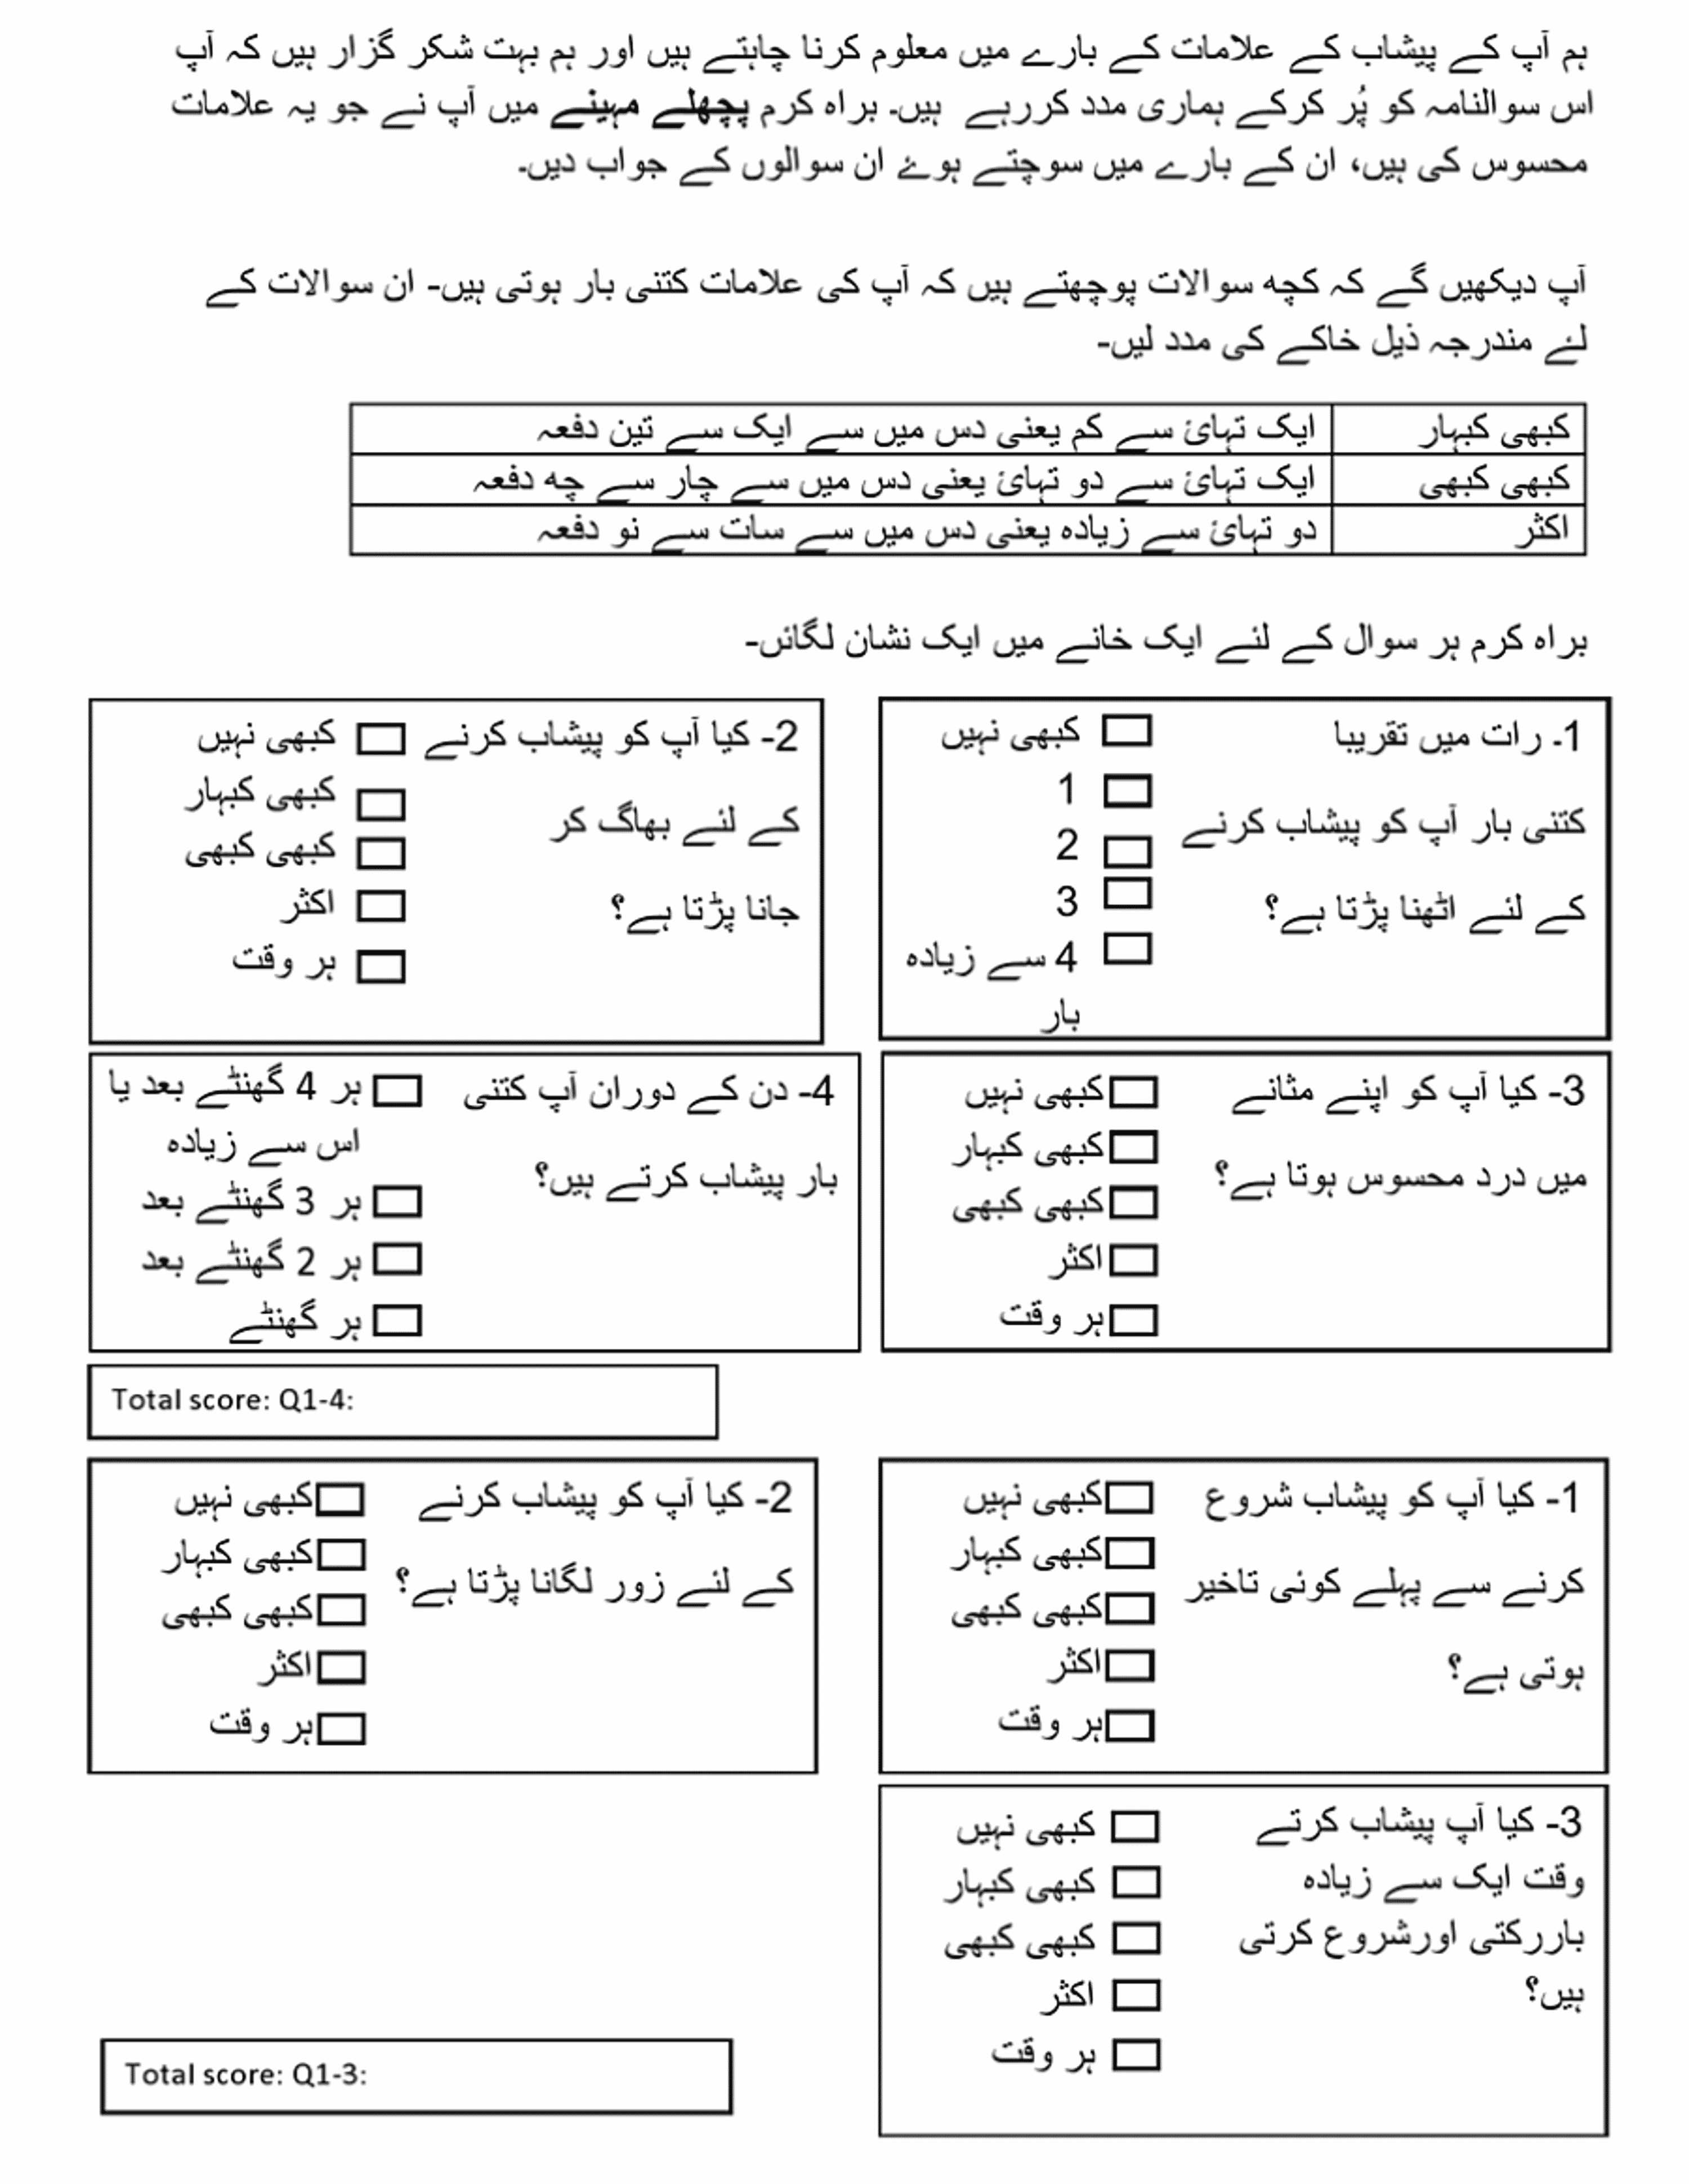 Cureus Translation And Validation Of Bristol Female Lower Urinary Tract Symptoms Questionnaire For Urinary Incontinence In Urdu